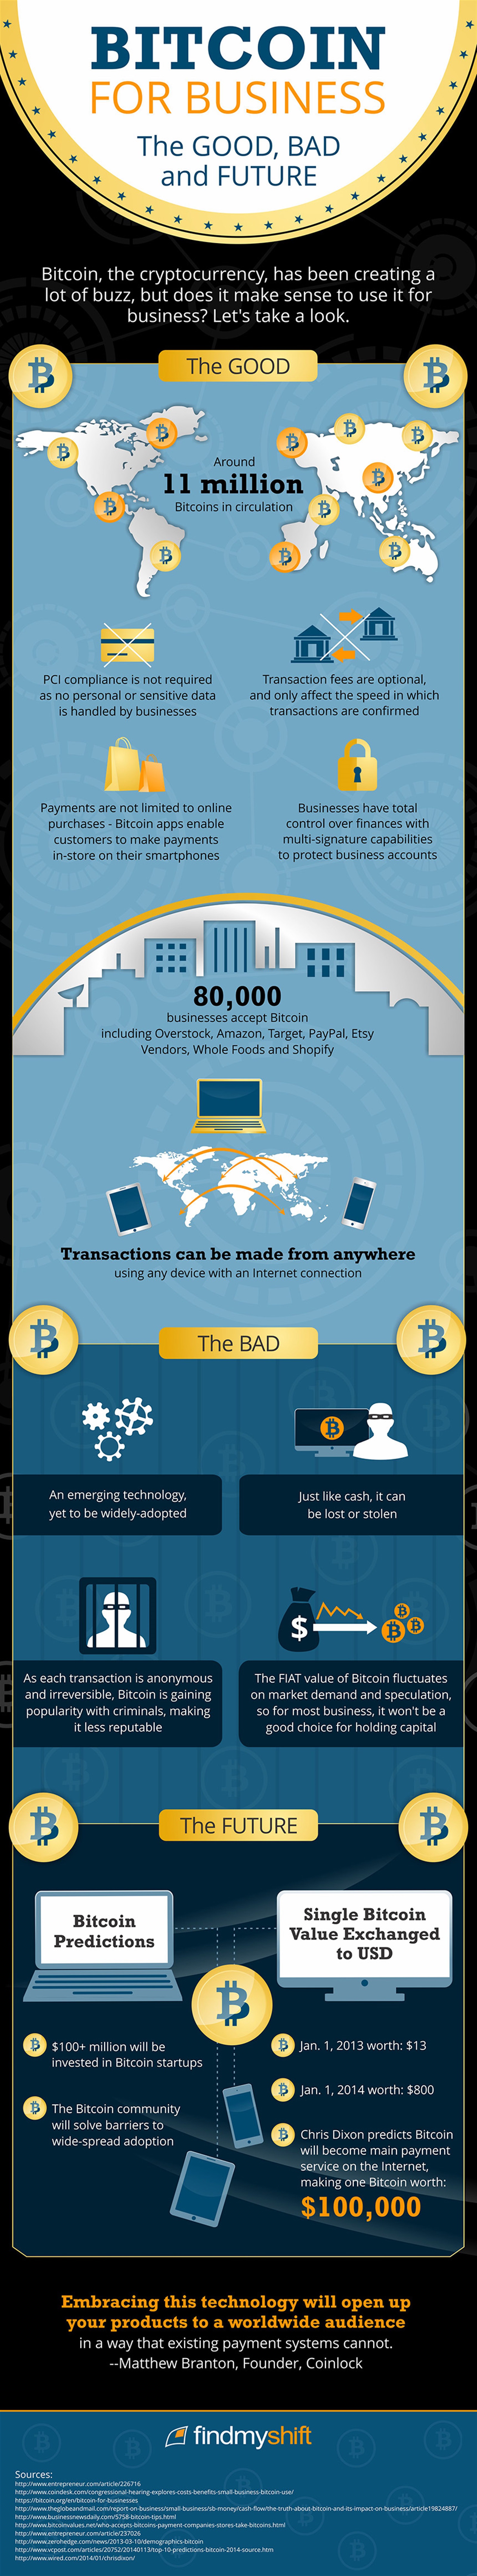 Bitcoin for Business